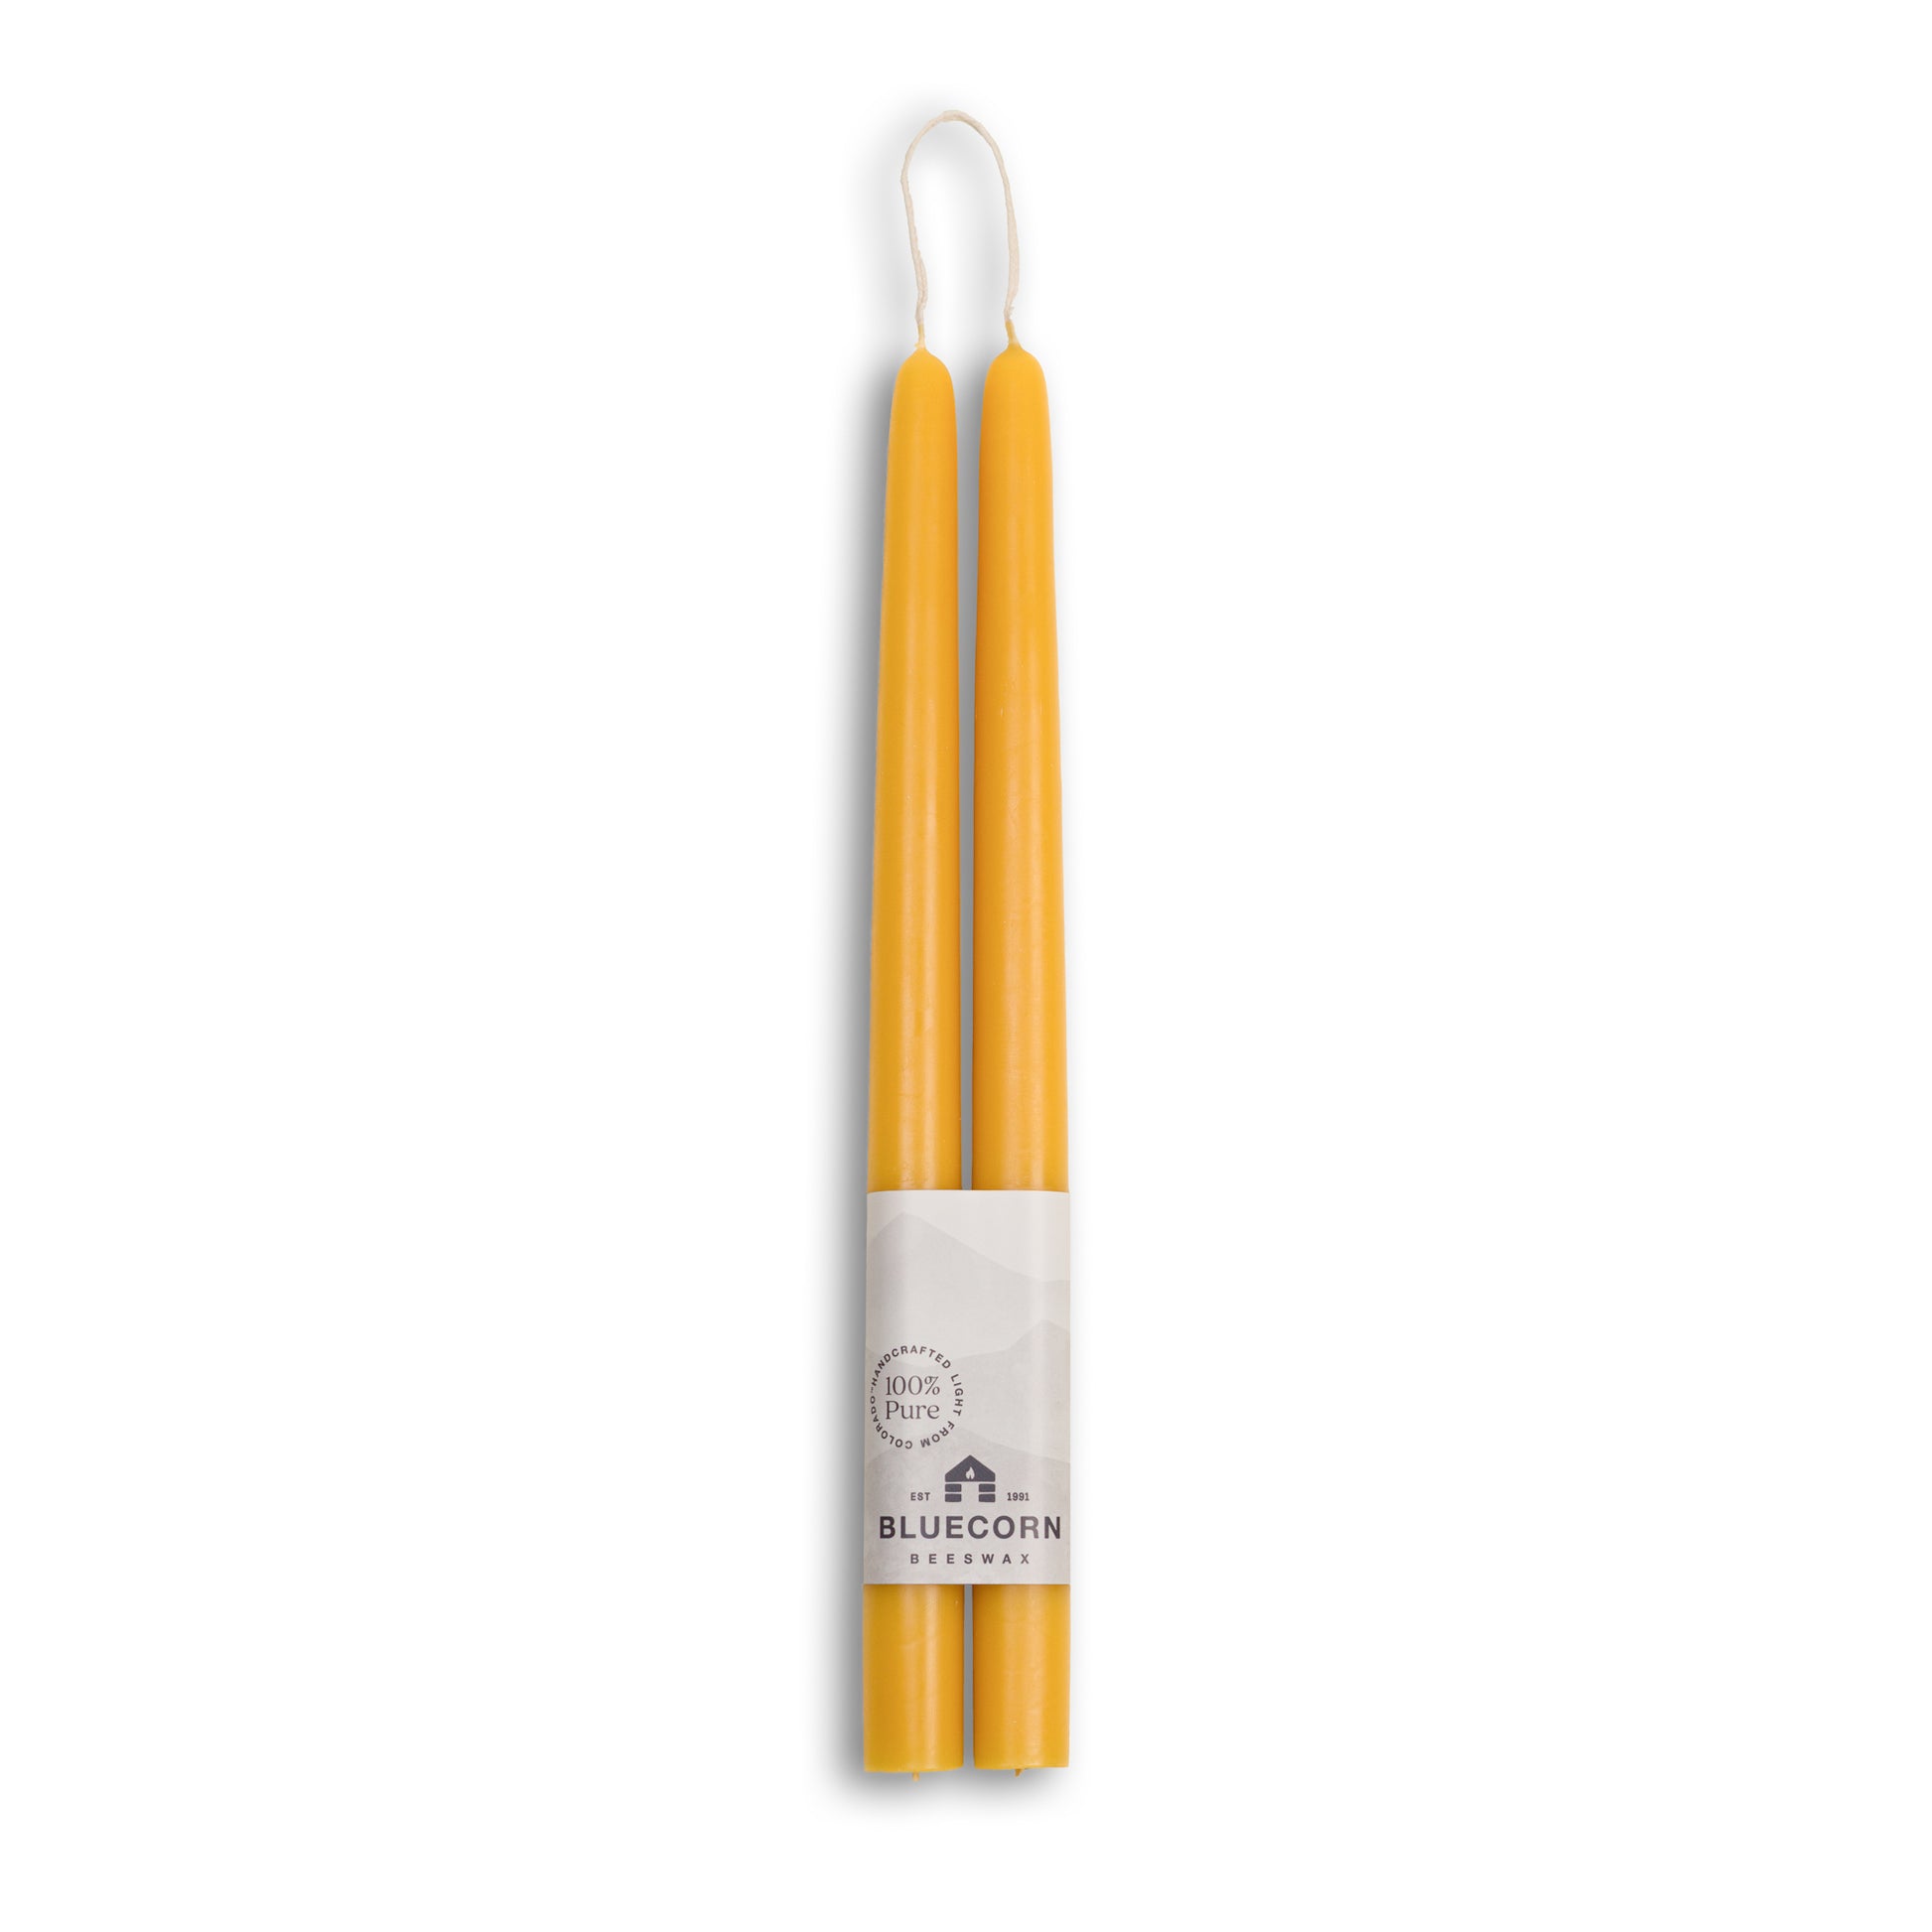 Pure beeswax taper candles from Bluecorn Candles. Pair of 12" long candlesticks. Yellow tapered candles. Natural, non toxic candles.